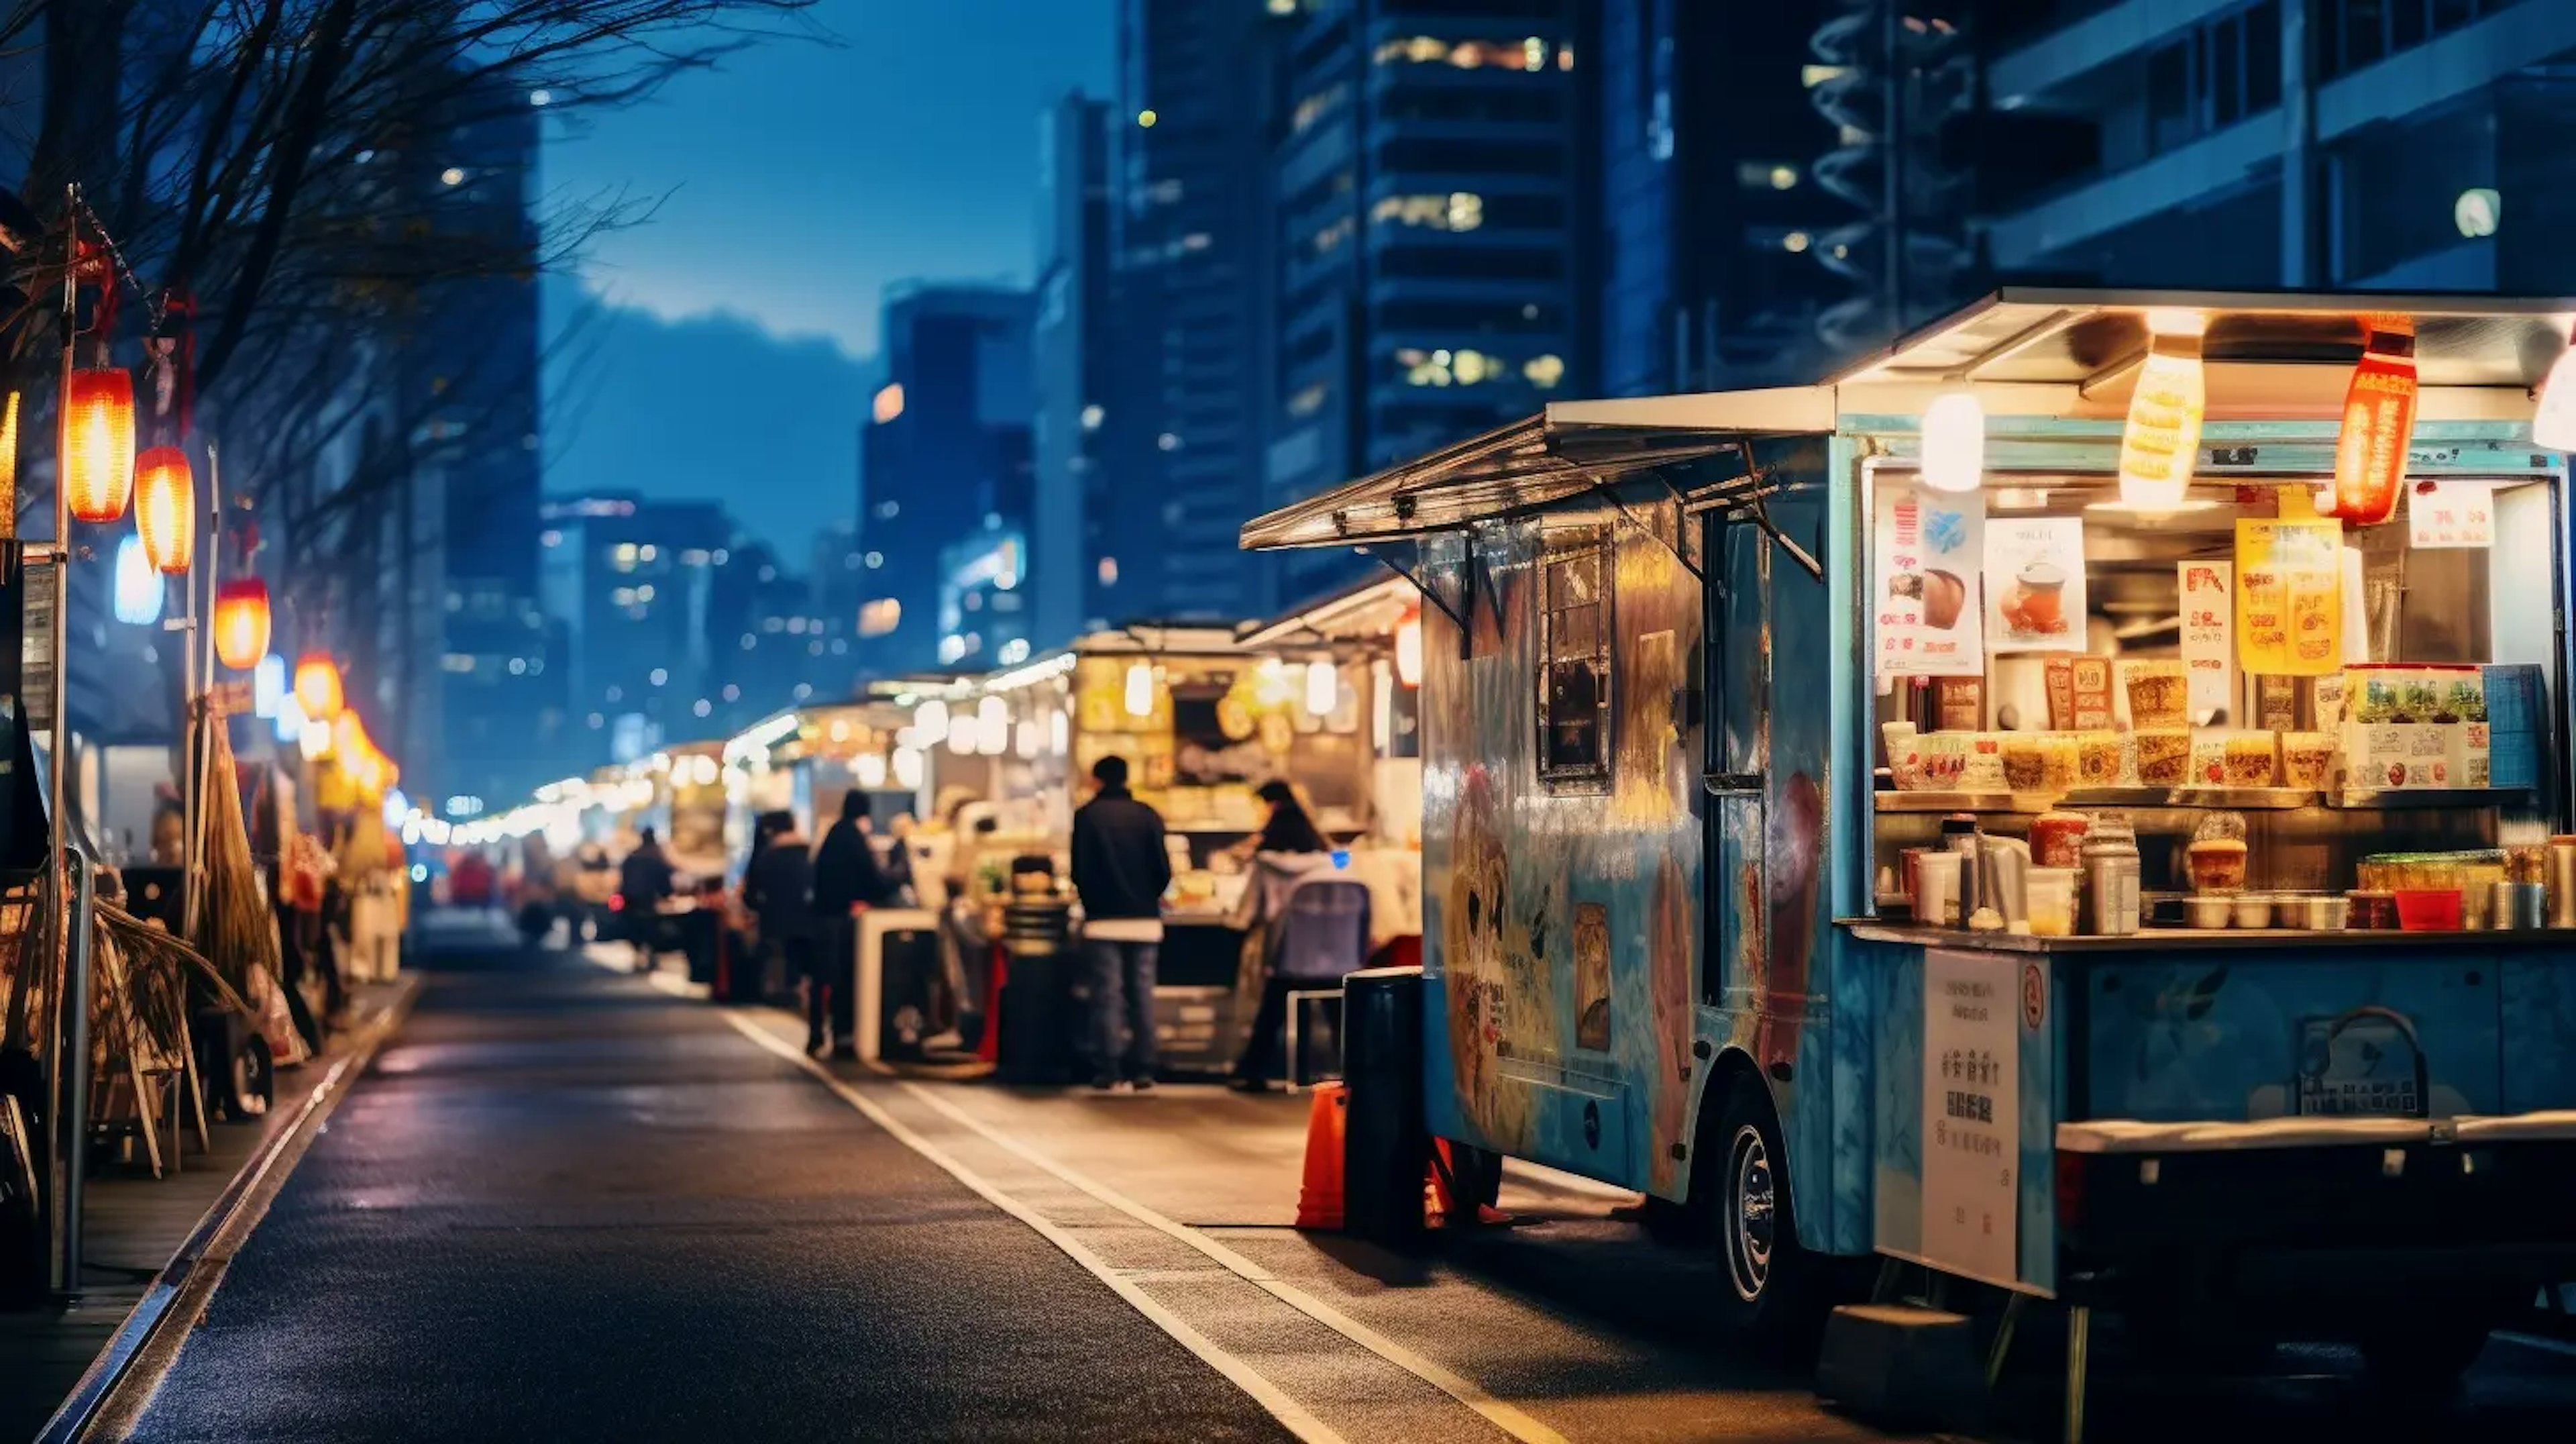 A bustling street in Tokyo with diverse food trucks serving eager customers